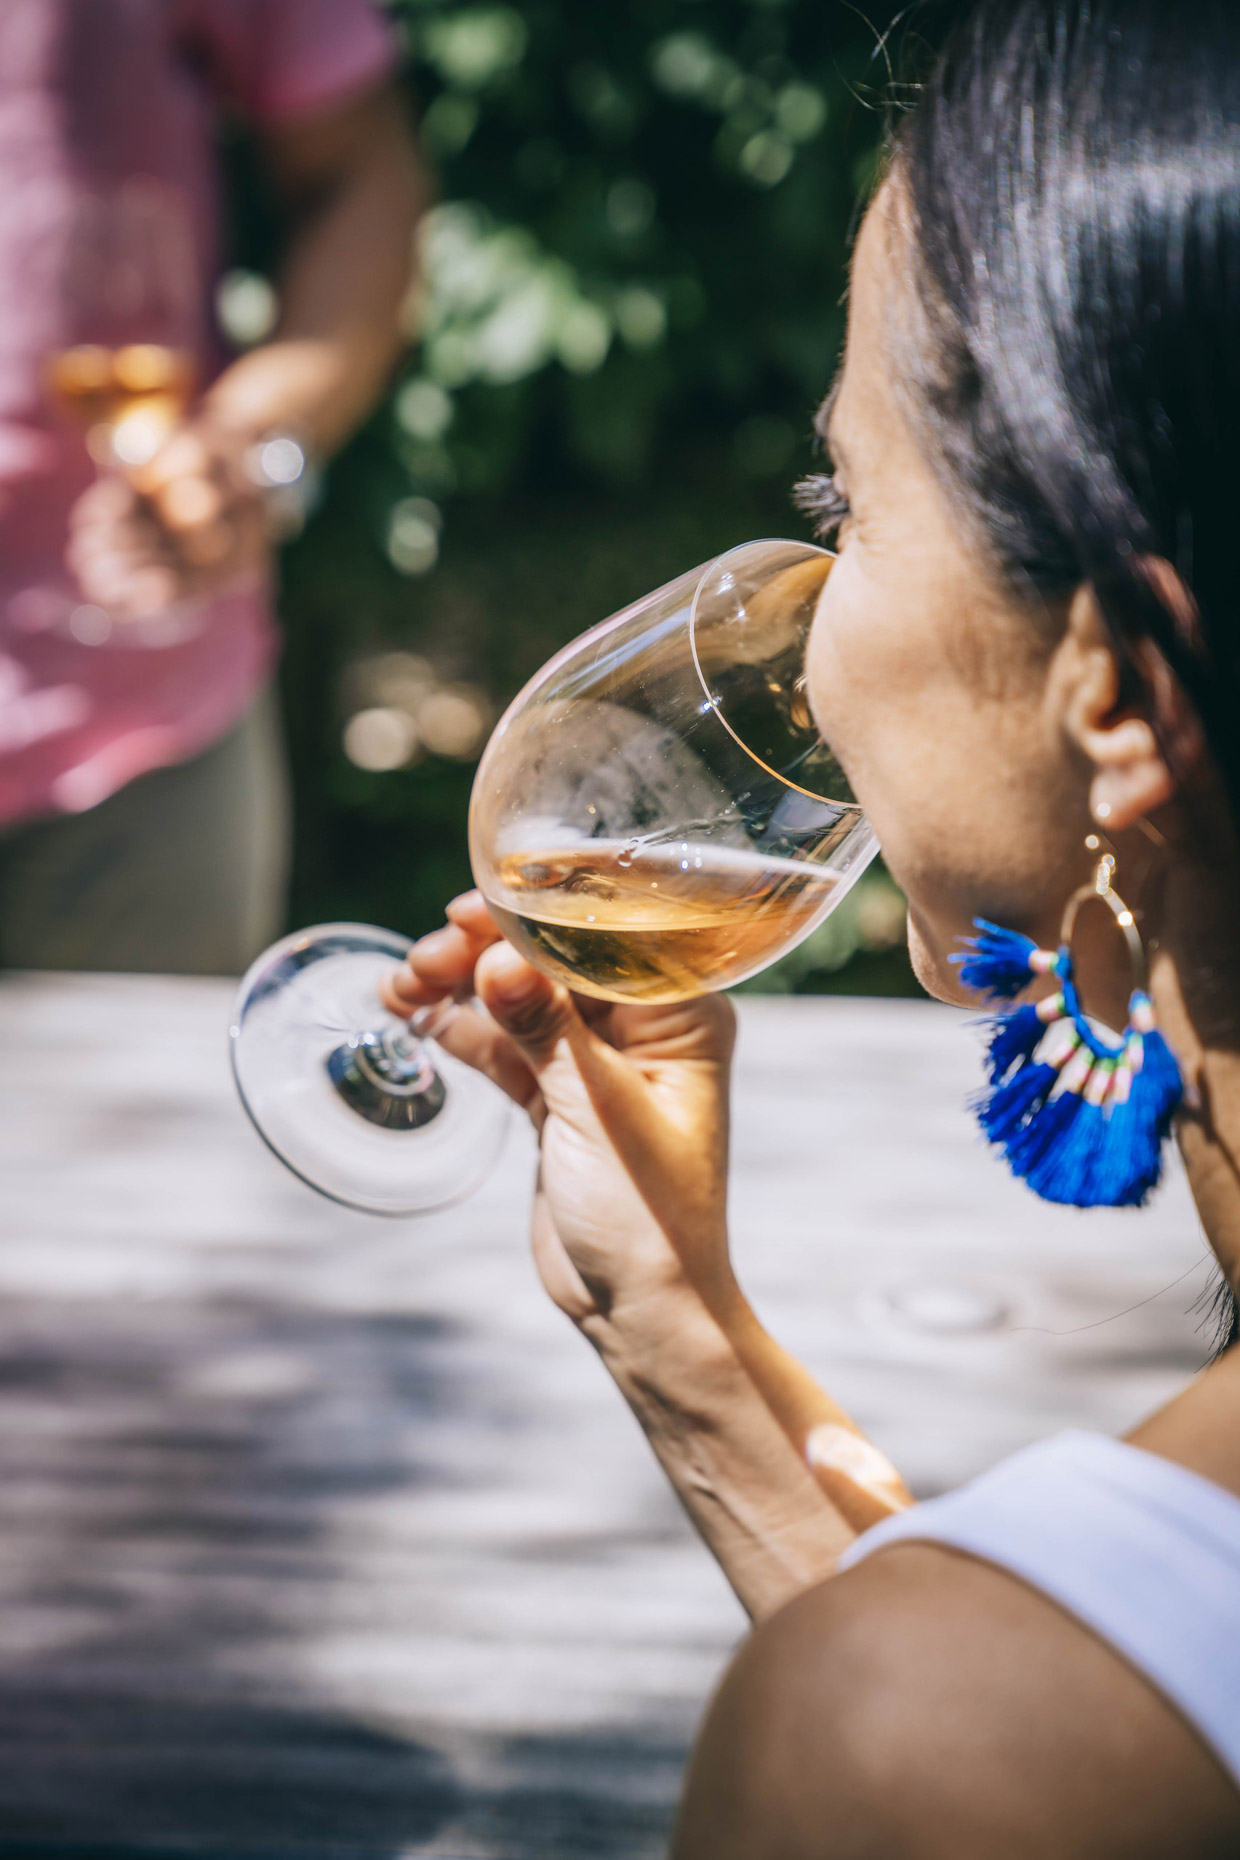 Profile of woman drinking glass of rose wine